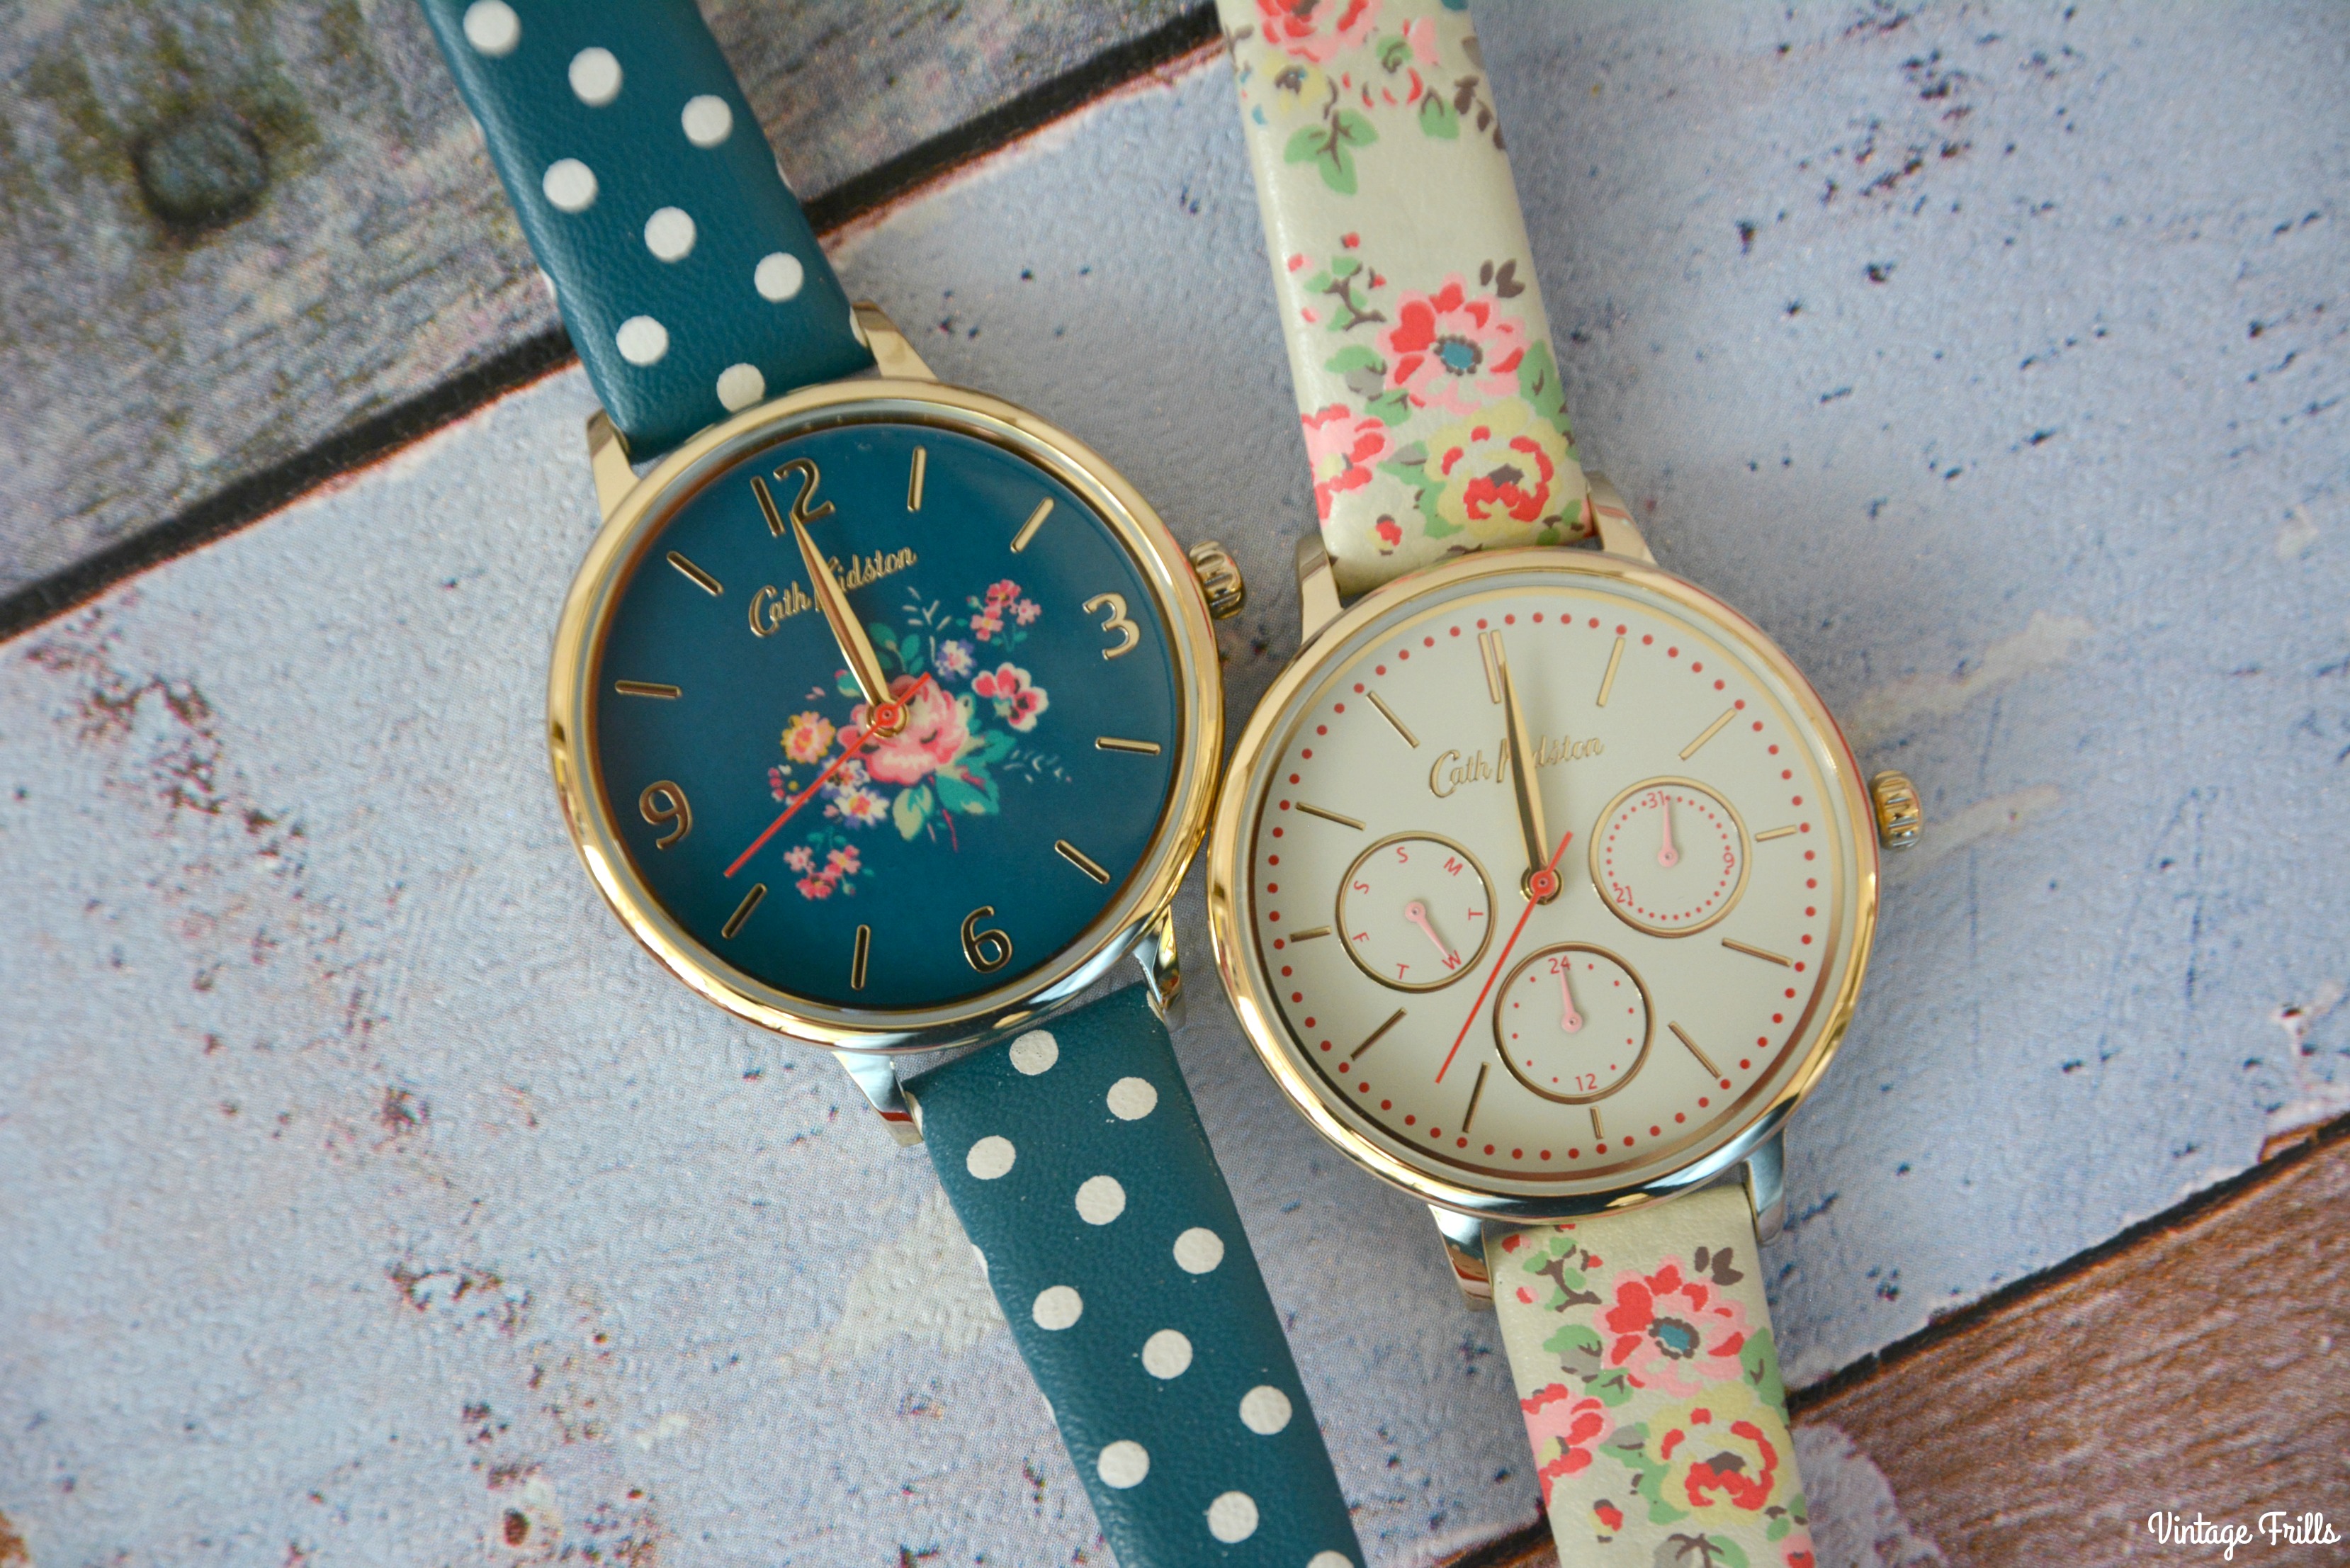 Cath Kidston Watch Review • Vintage Frills